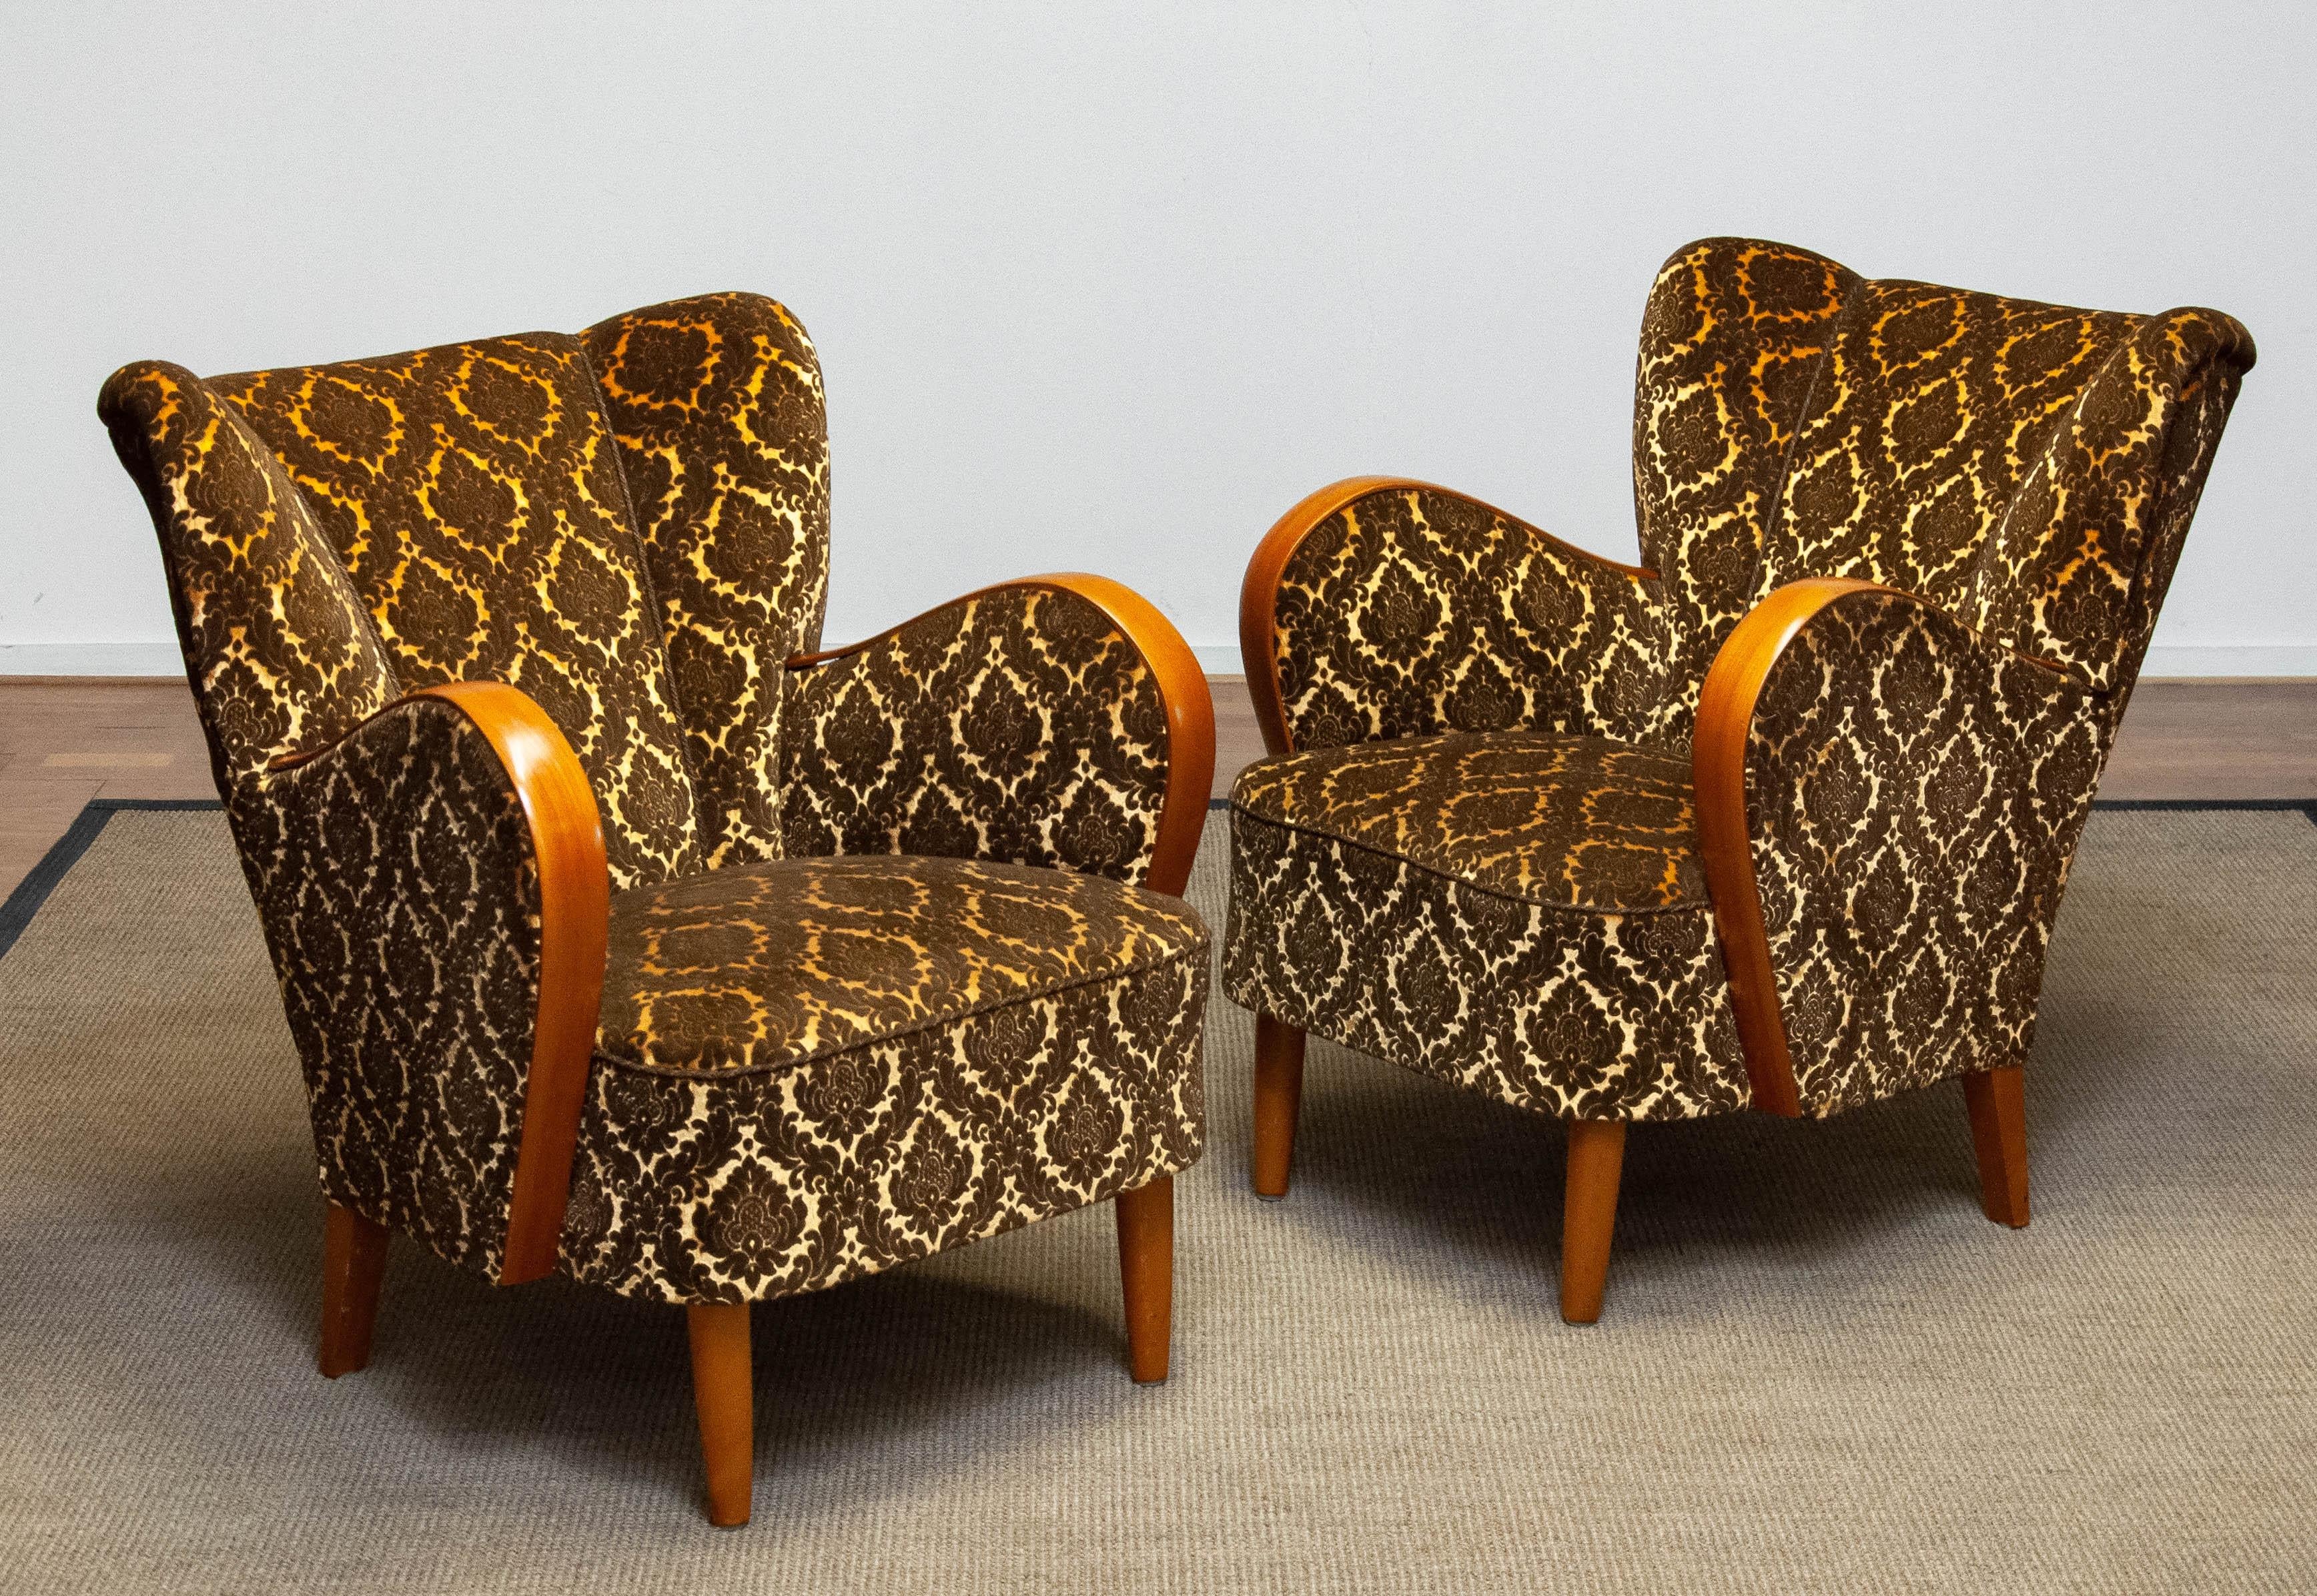 Absolutely beautiful and complete original pair Scandinavian lounge / club chairs in the style of Fritz Hansen made in Danmark.
Both lounge / club chairs are upholstered with gold and brown two tone jacquard velvet fabric. The bentwood armrests are